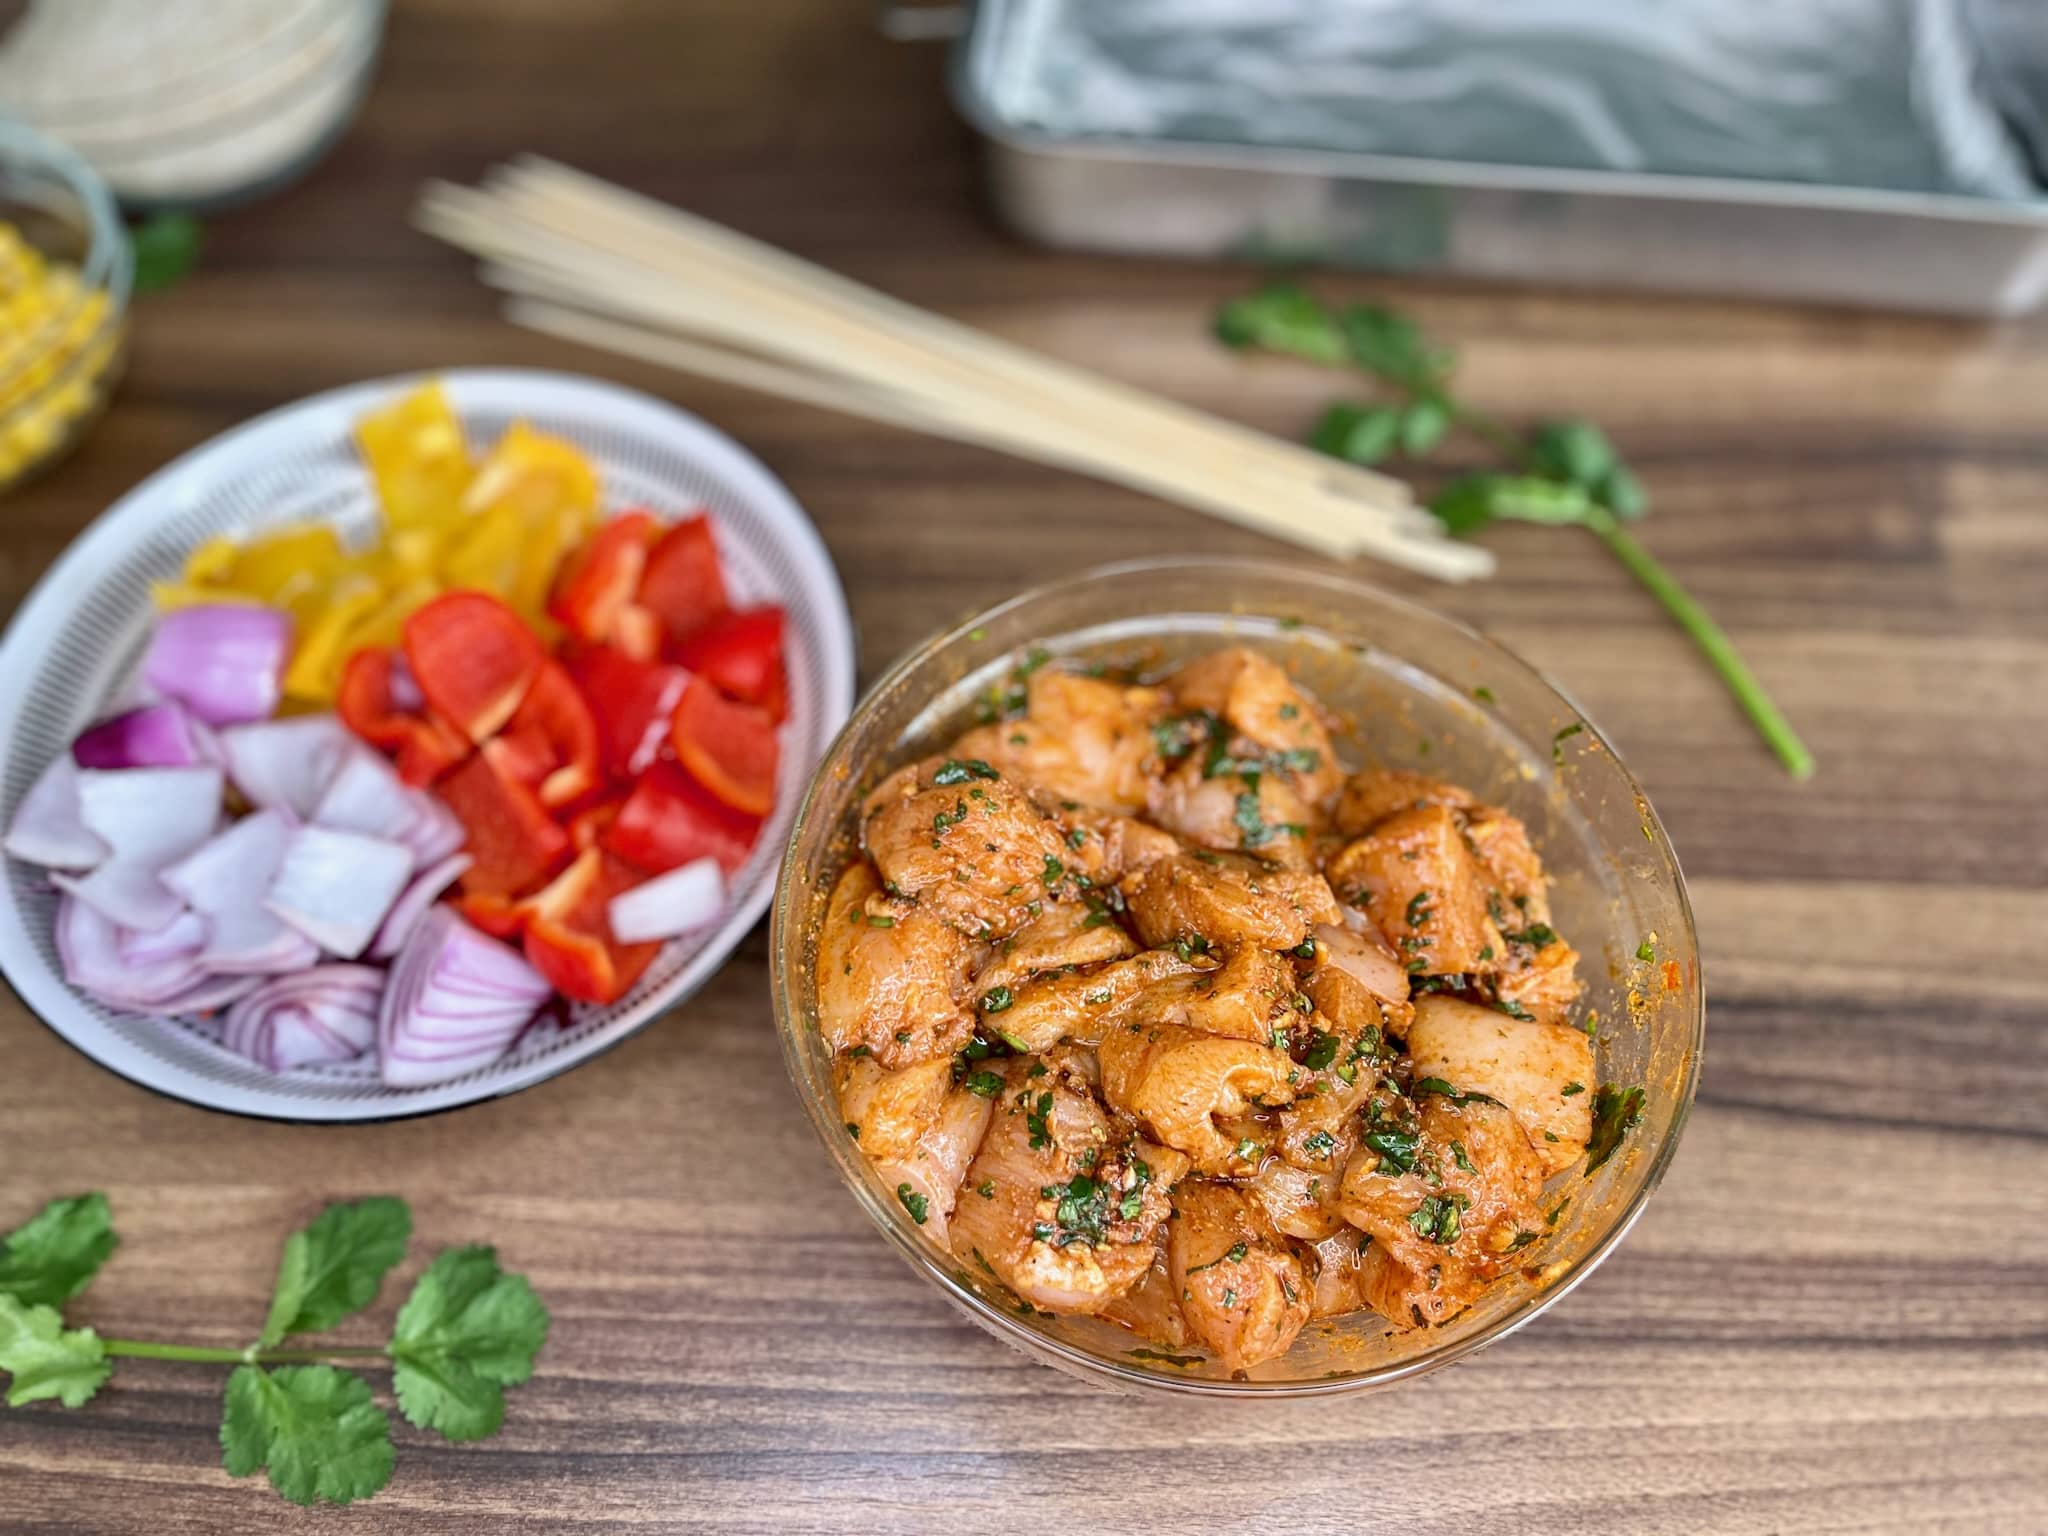 Nicely marinated chicken breast cubes in a bowl